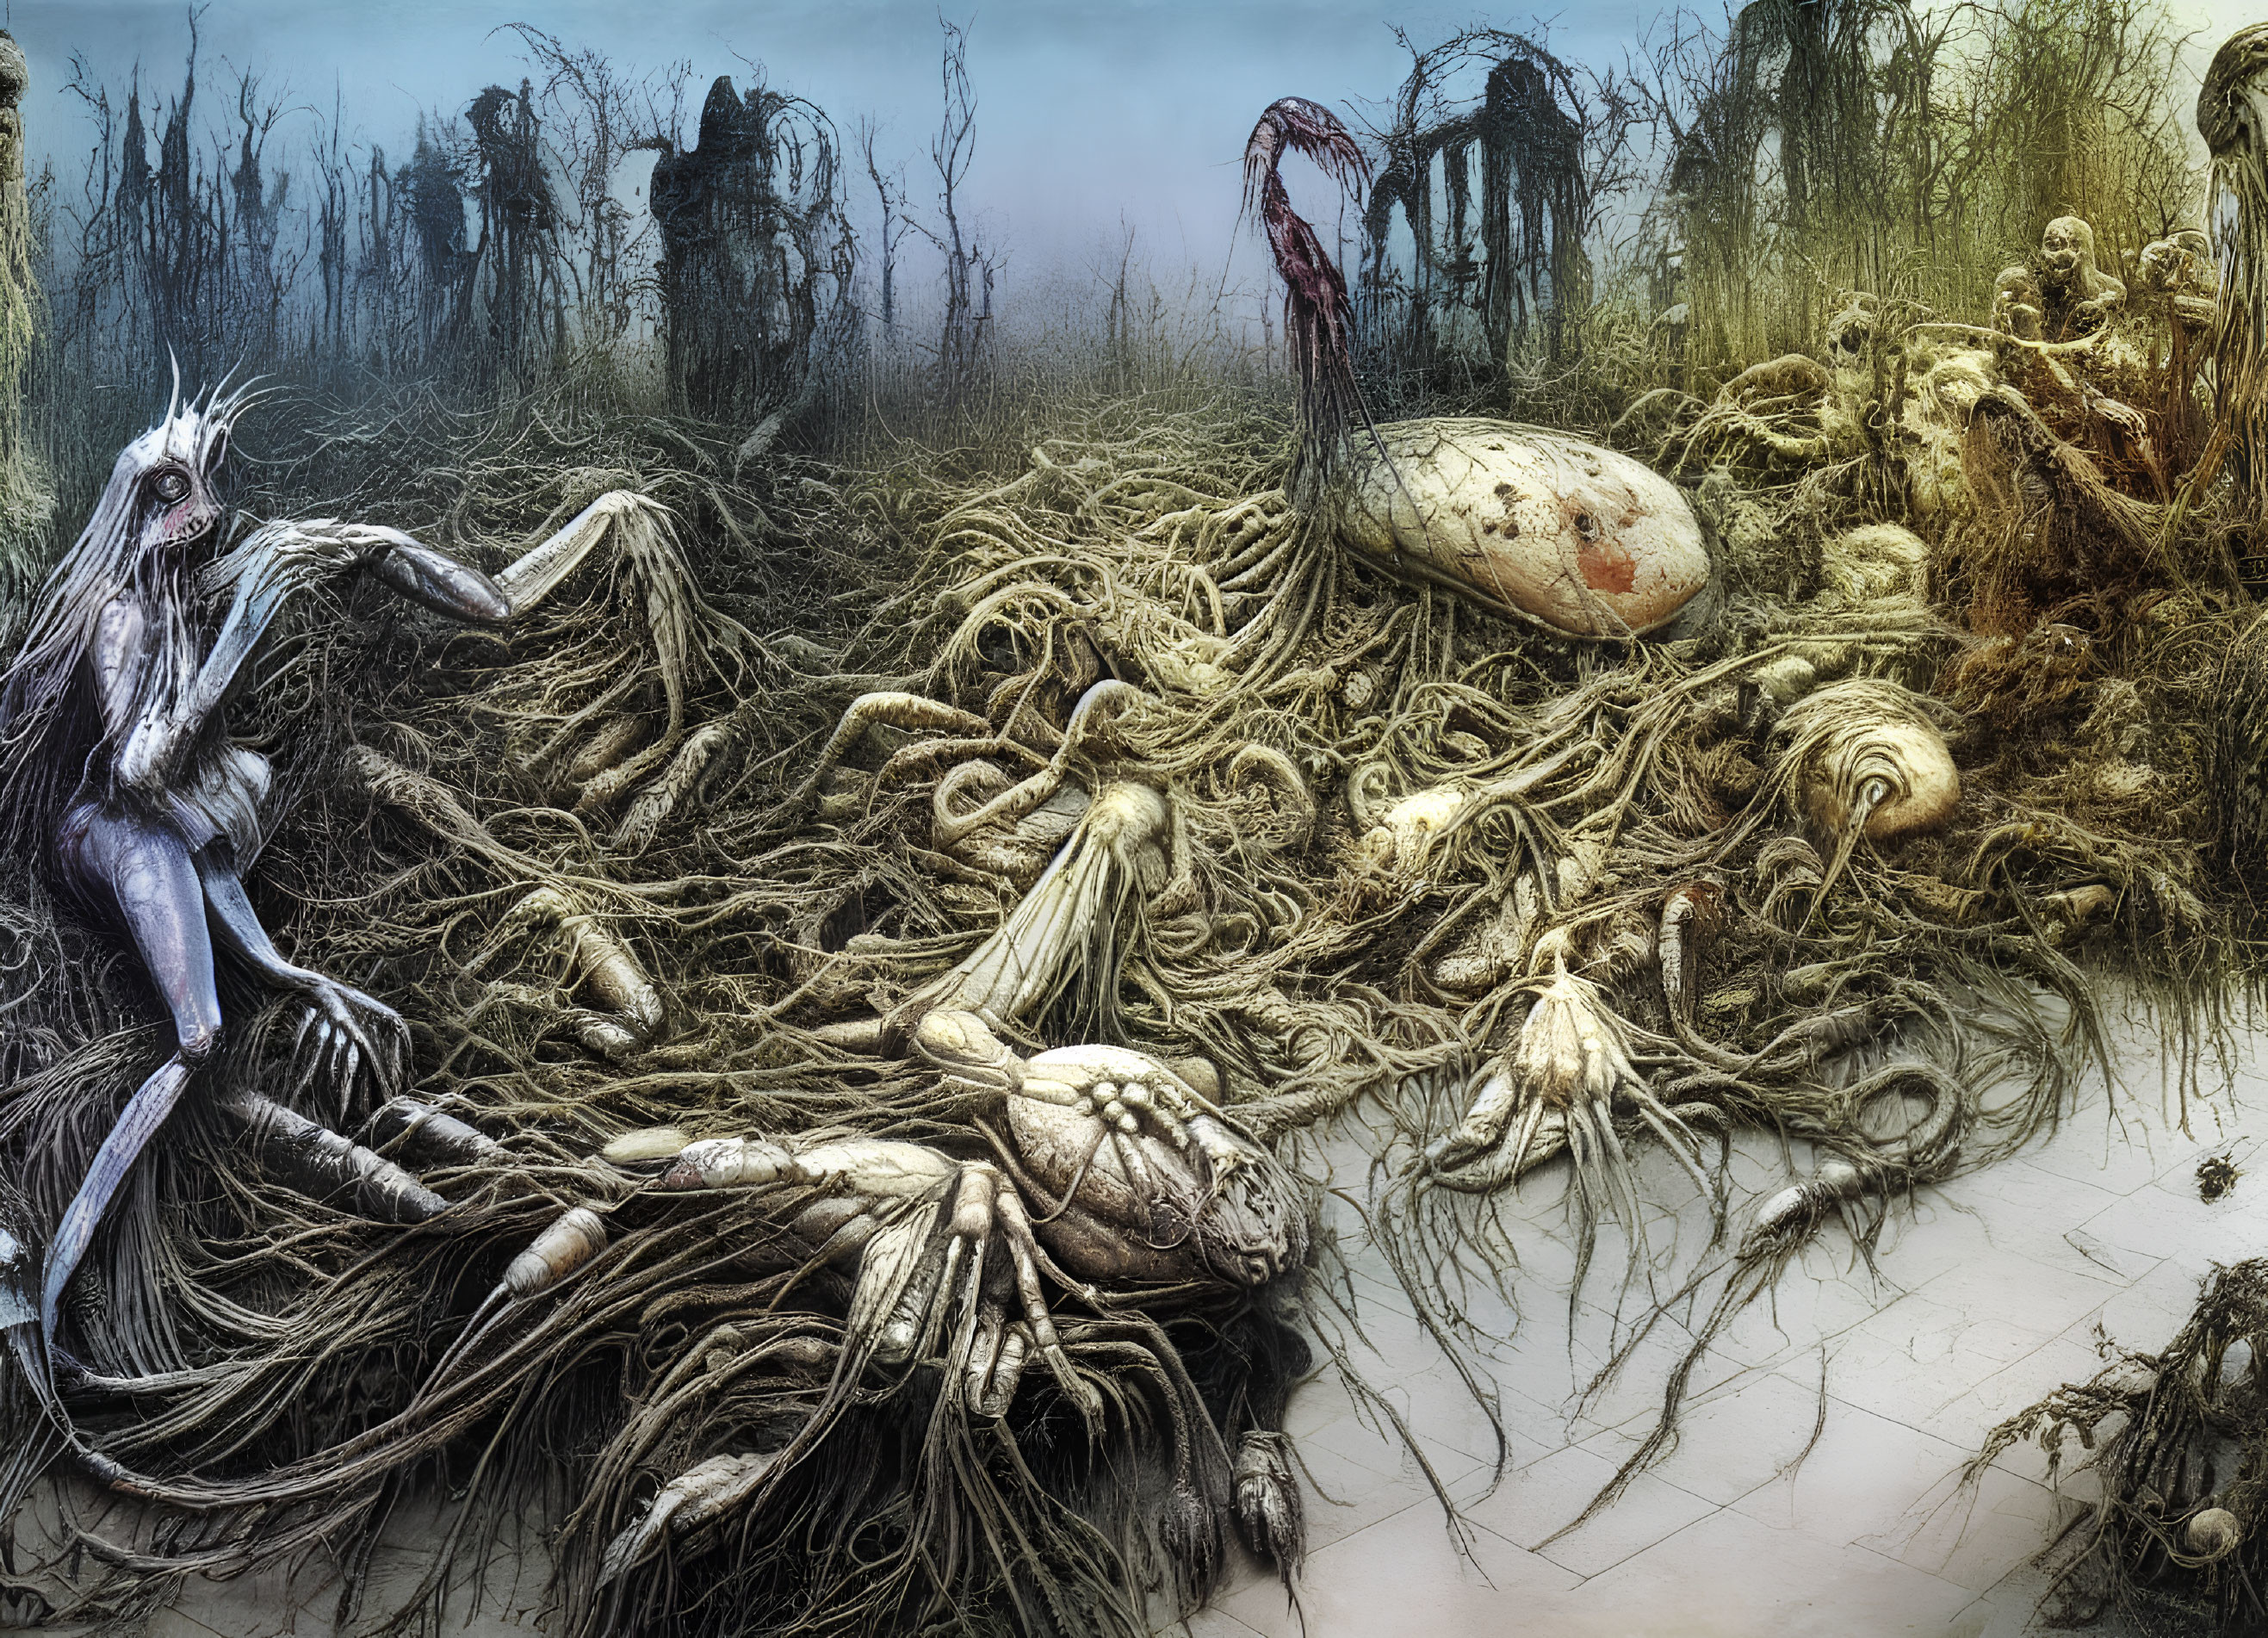 Grotesque surreal landscape with twisted figures and entangled roots